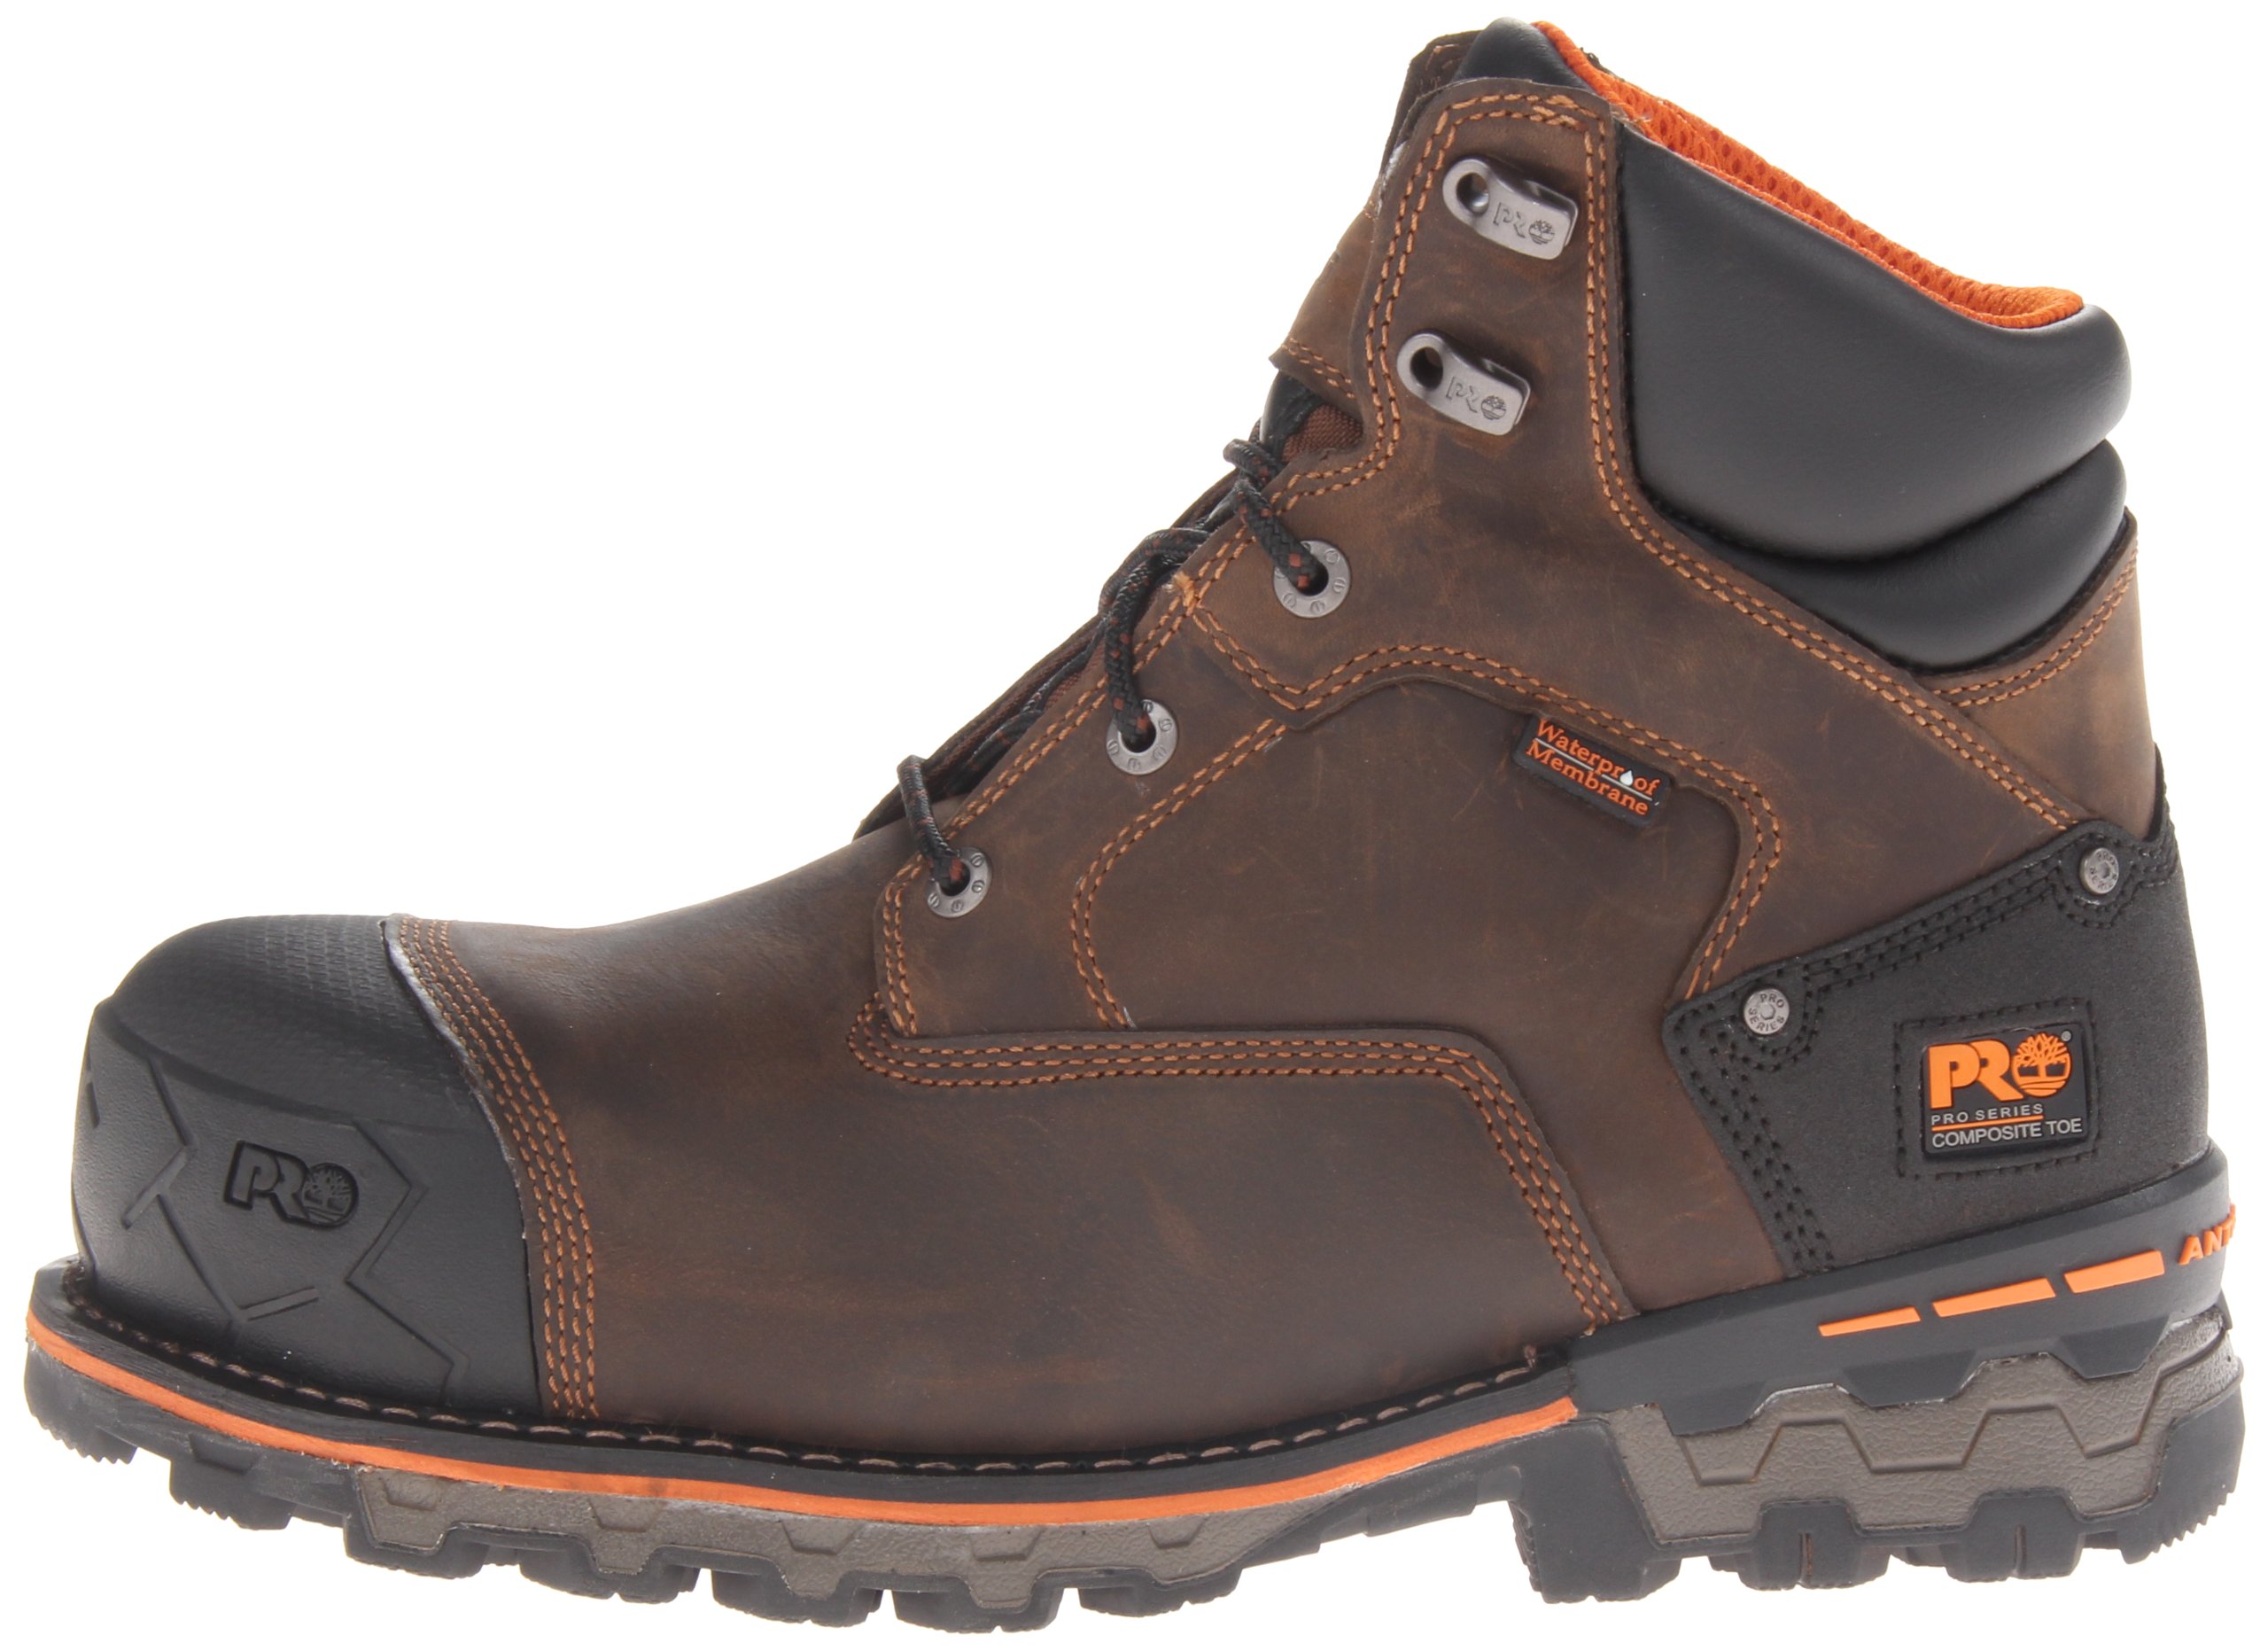 Timberland PRO Men's Boondock 6 Inch Composite Safety Toe Waterproof 6 CT WP, Brown, 10 Wide